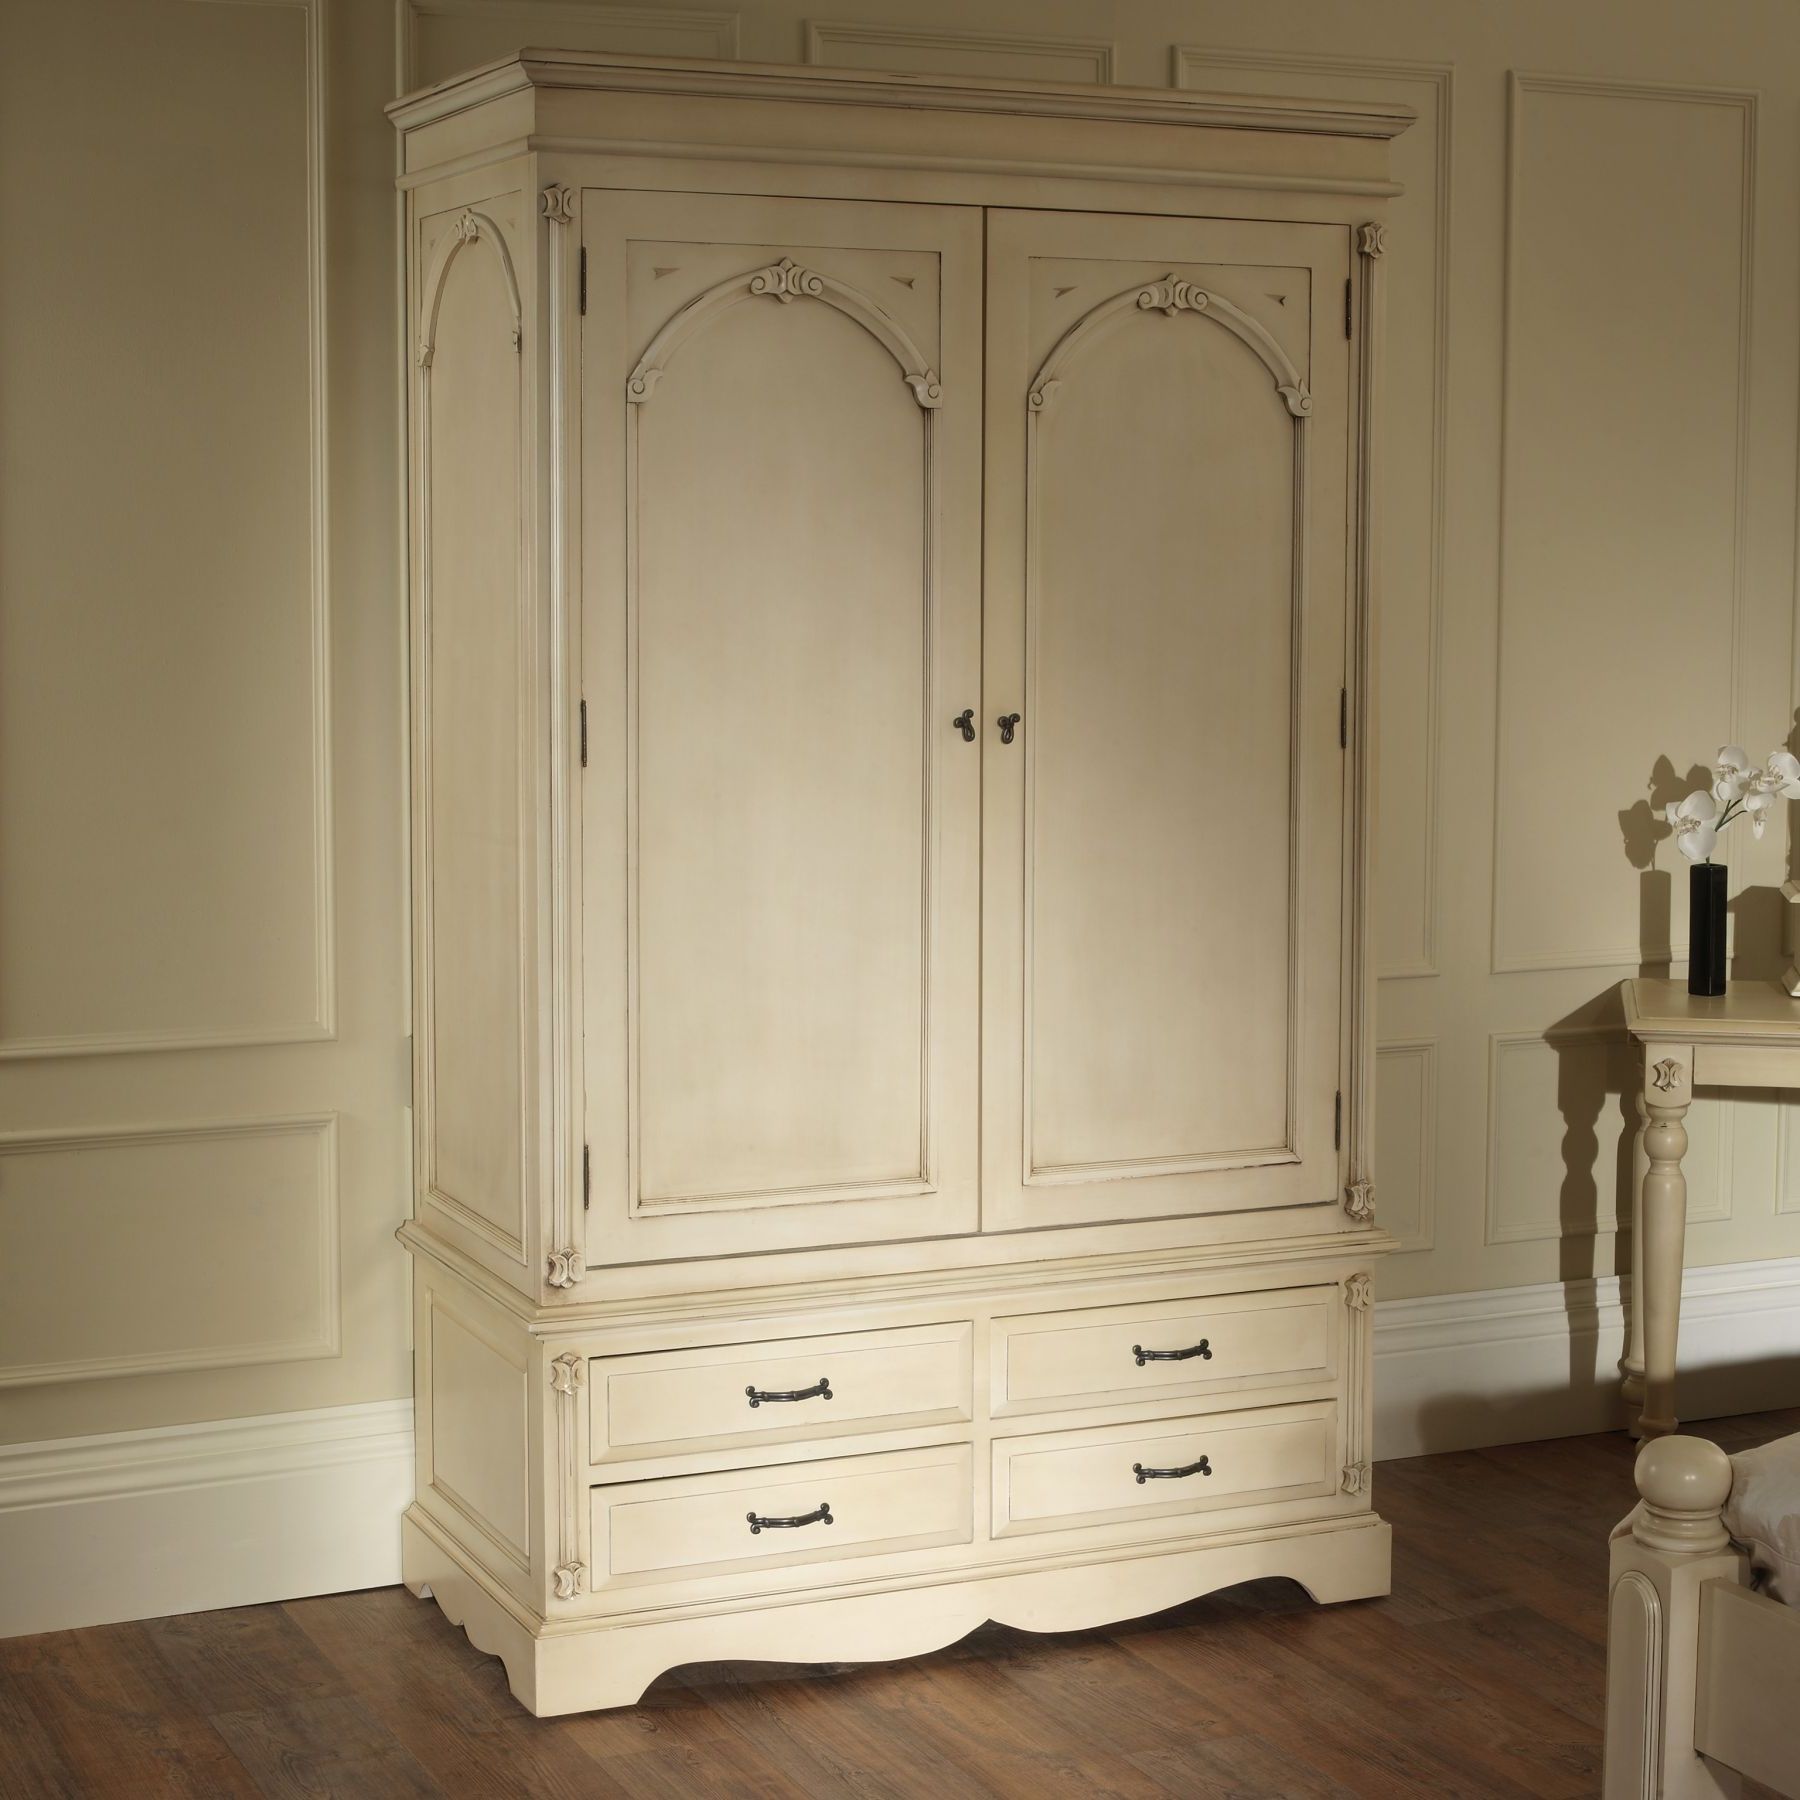 2018 Victorian Antique French Wardrobe Works Well Alongside Our Shabby Within French Shabby Chic Wardrobes (View 11 of 15)